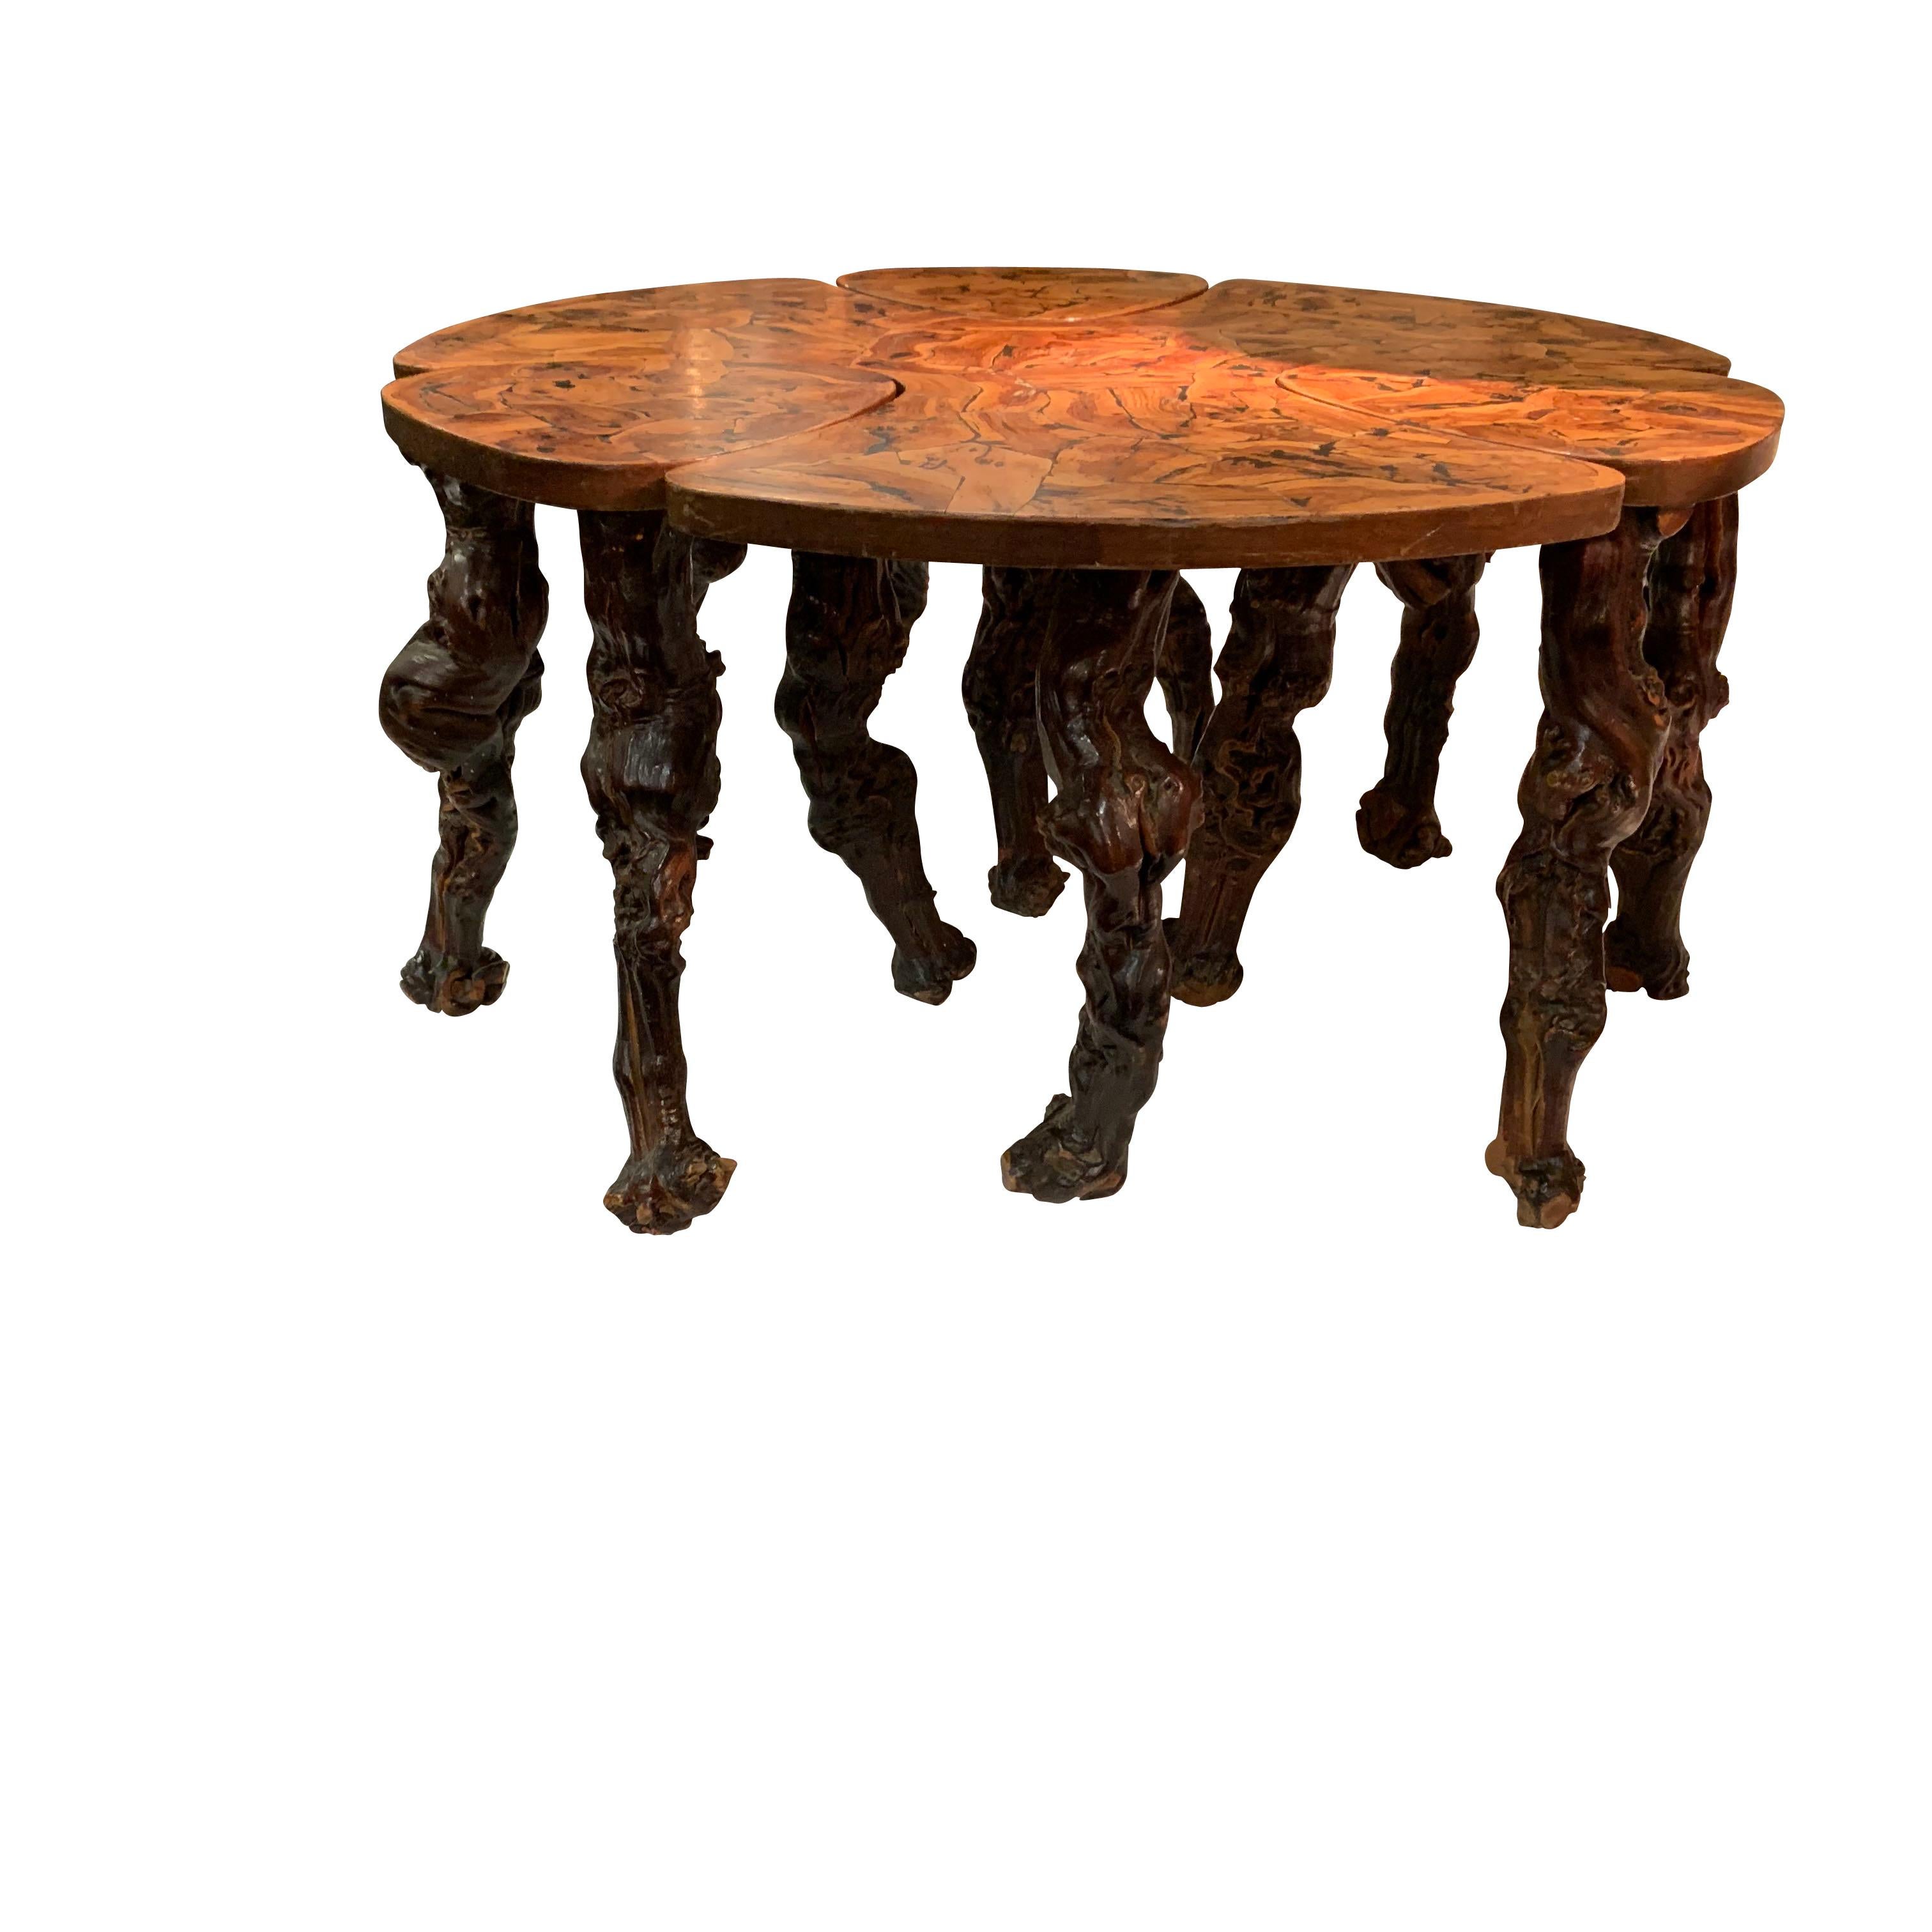 20th century French very unique and unusual coffee table with three pull out sections that can be used as either cocktail tables or could be used as stools.
Freeform legs
Table is made from French vines
Beautiful natural patina
Measurement is